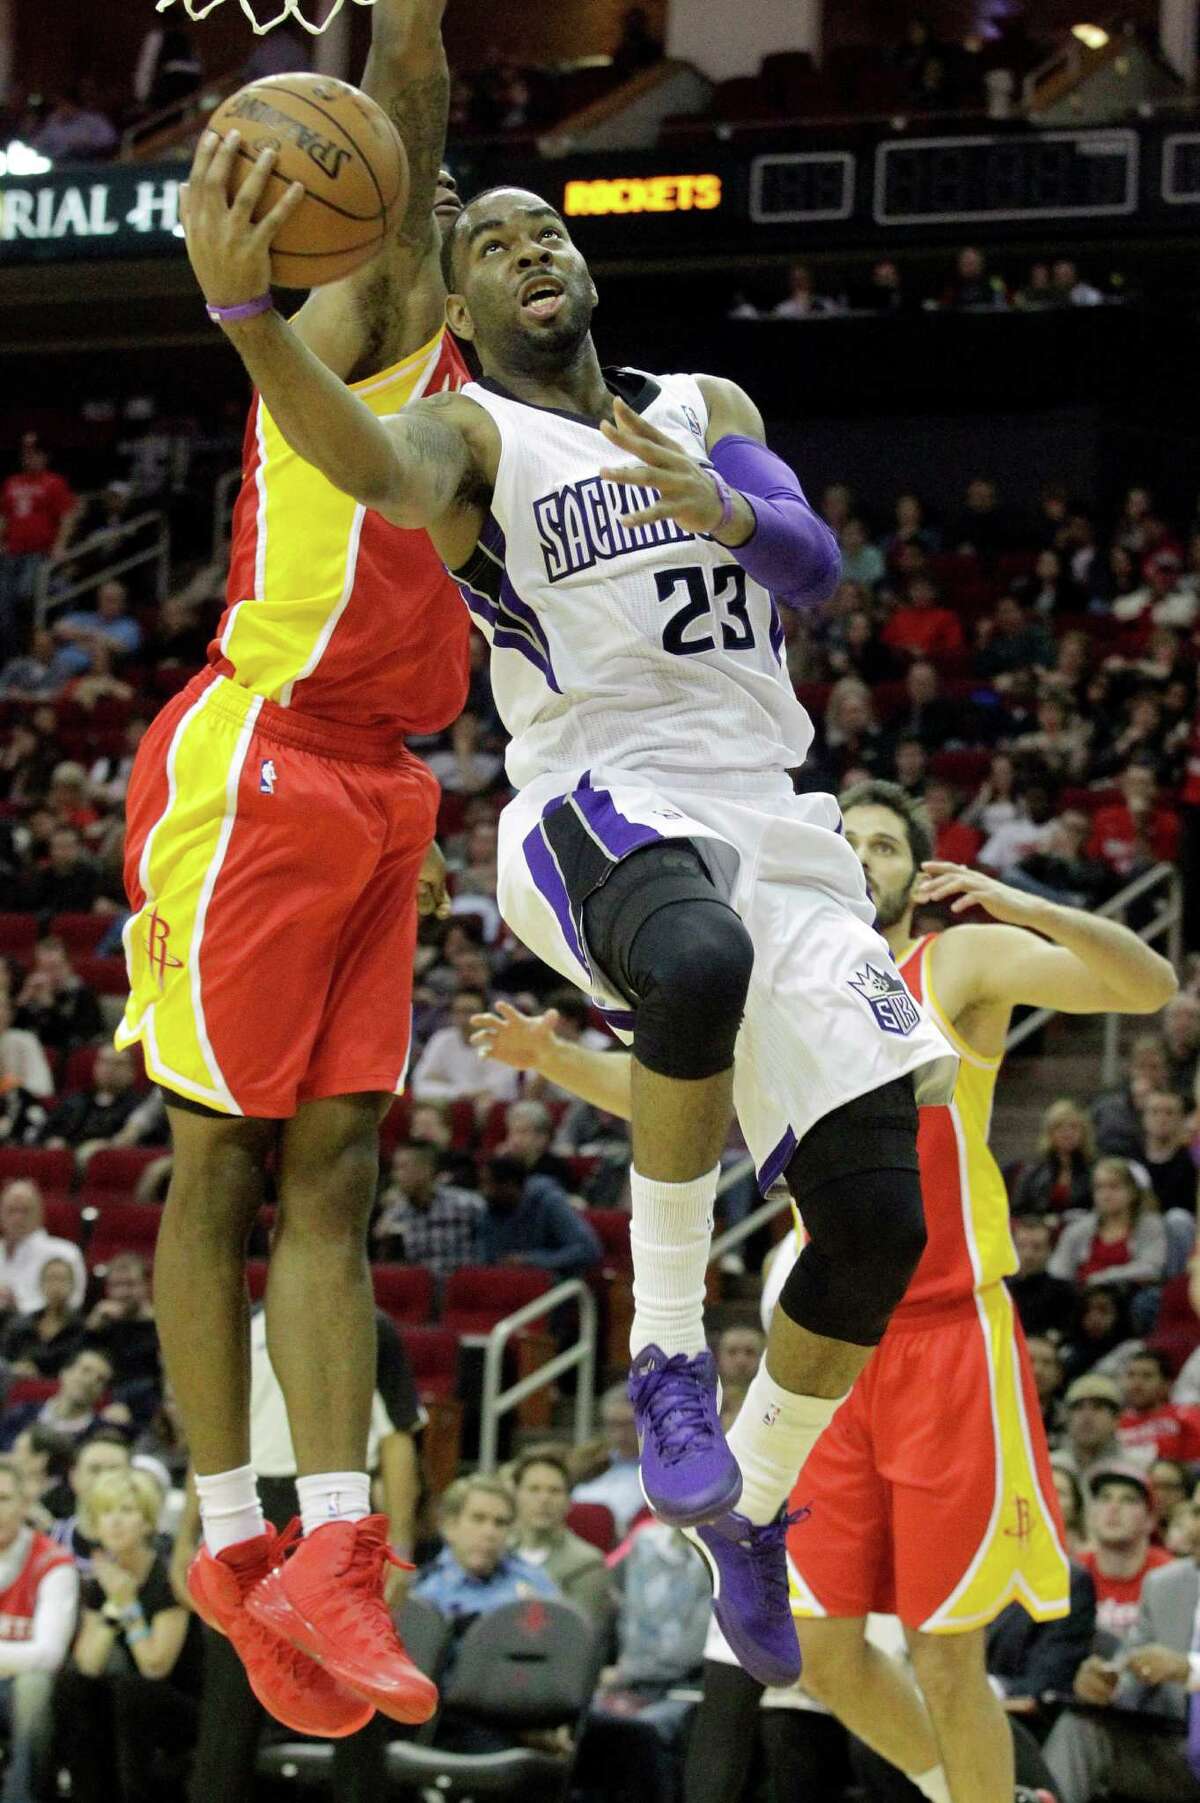 Sacramento Kings guard Marcus Thornton (23) lays the ball up over Houston Rockets forward Terrence Jones during the first period of an NBA basketball game, Tuesday, Dec. 31, 2013, in Houston. (AP Photo/Patric Schneider)